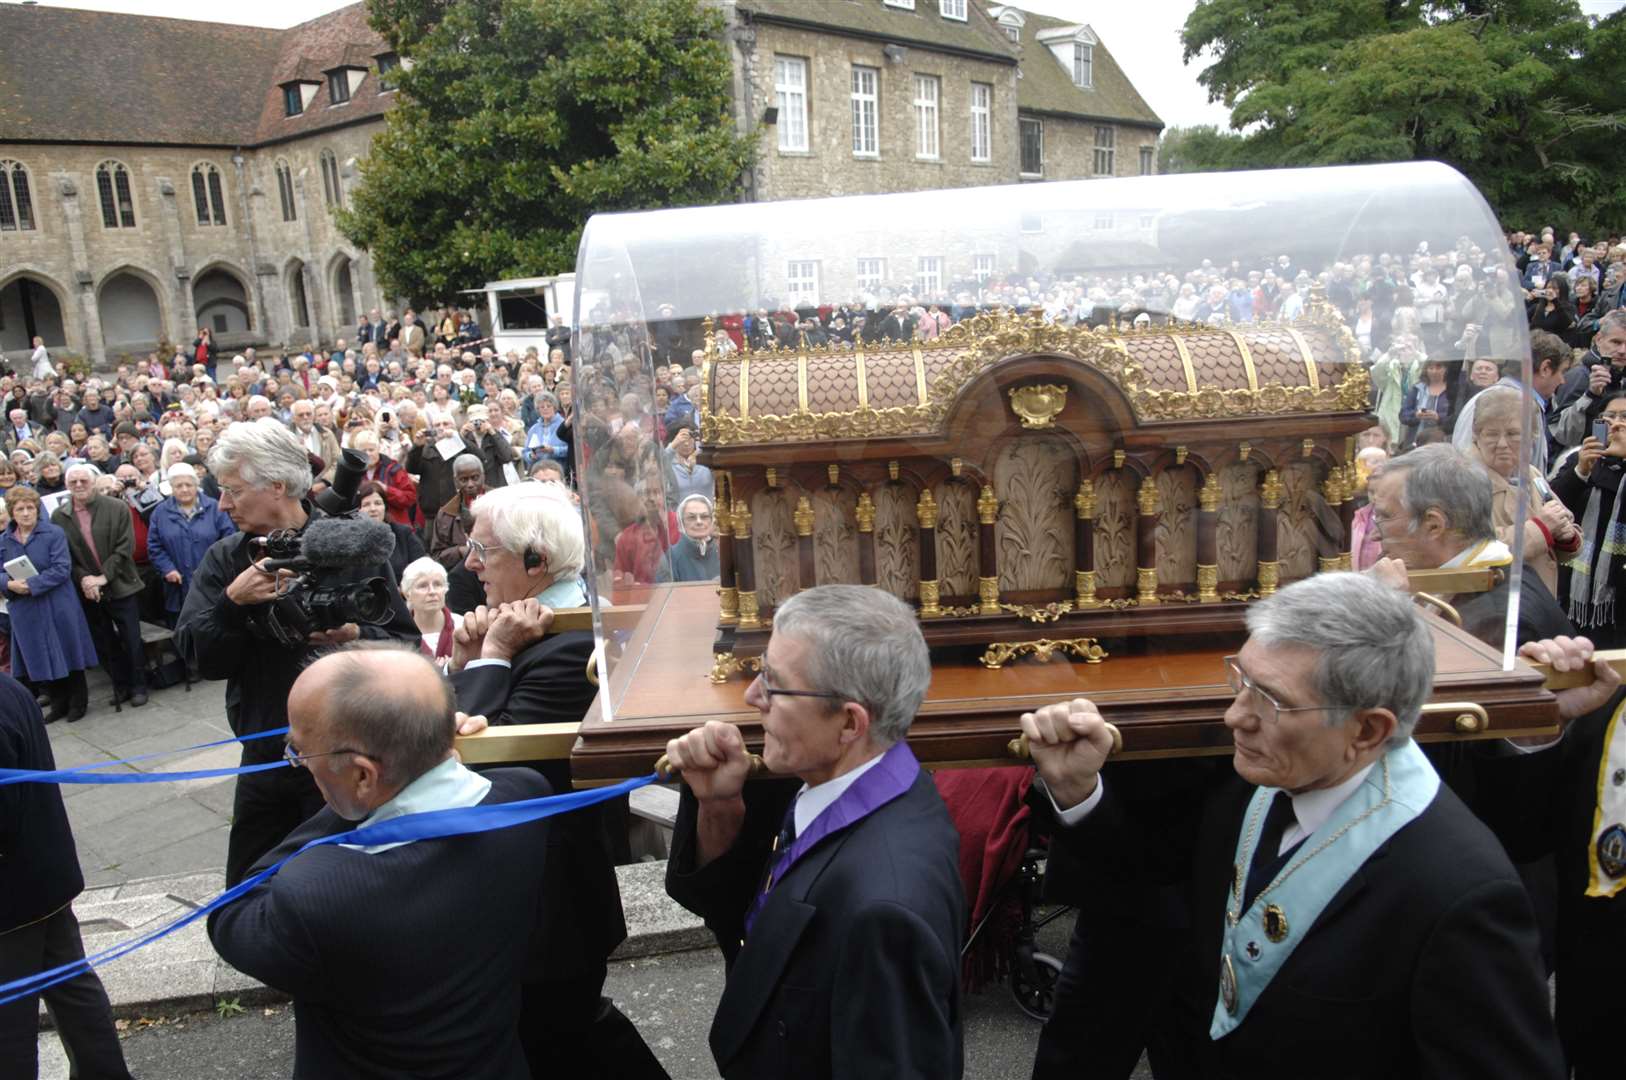 Crowds flocked in 2009 to see the remains of Saint St Therese of Lisieux arrive at Aylesford Priory. Picture: Matthew Walker